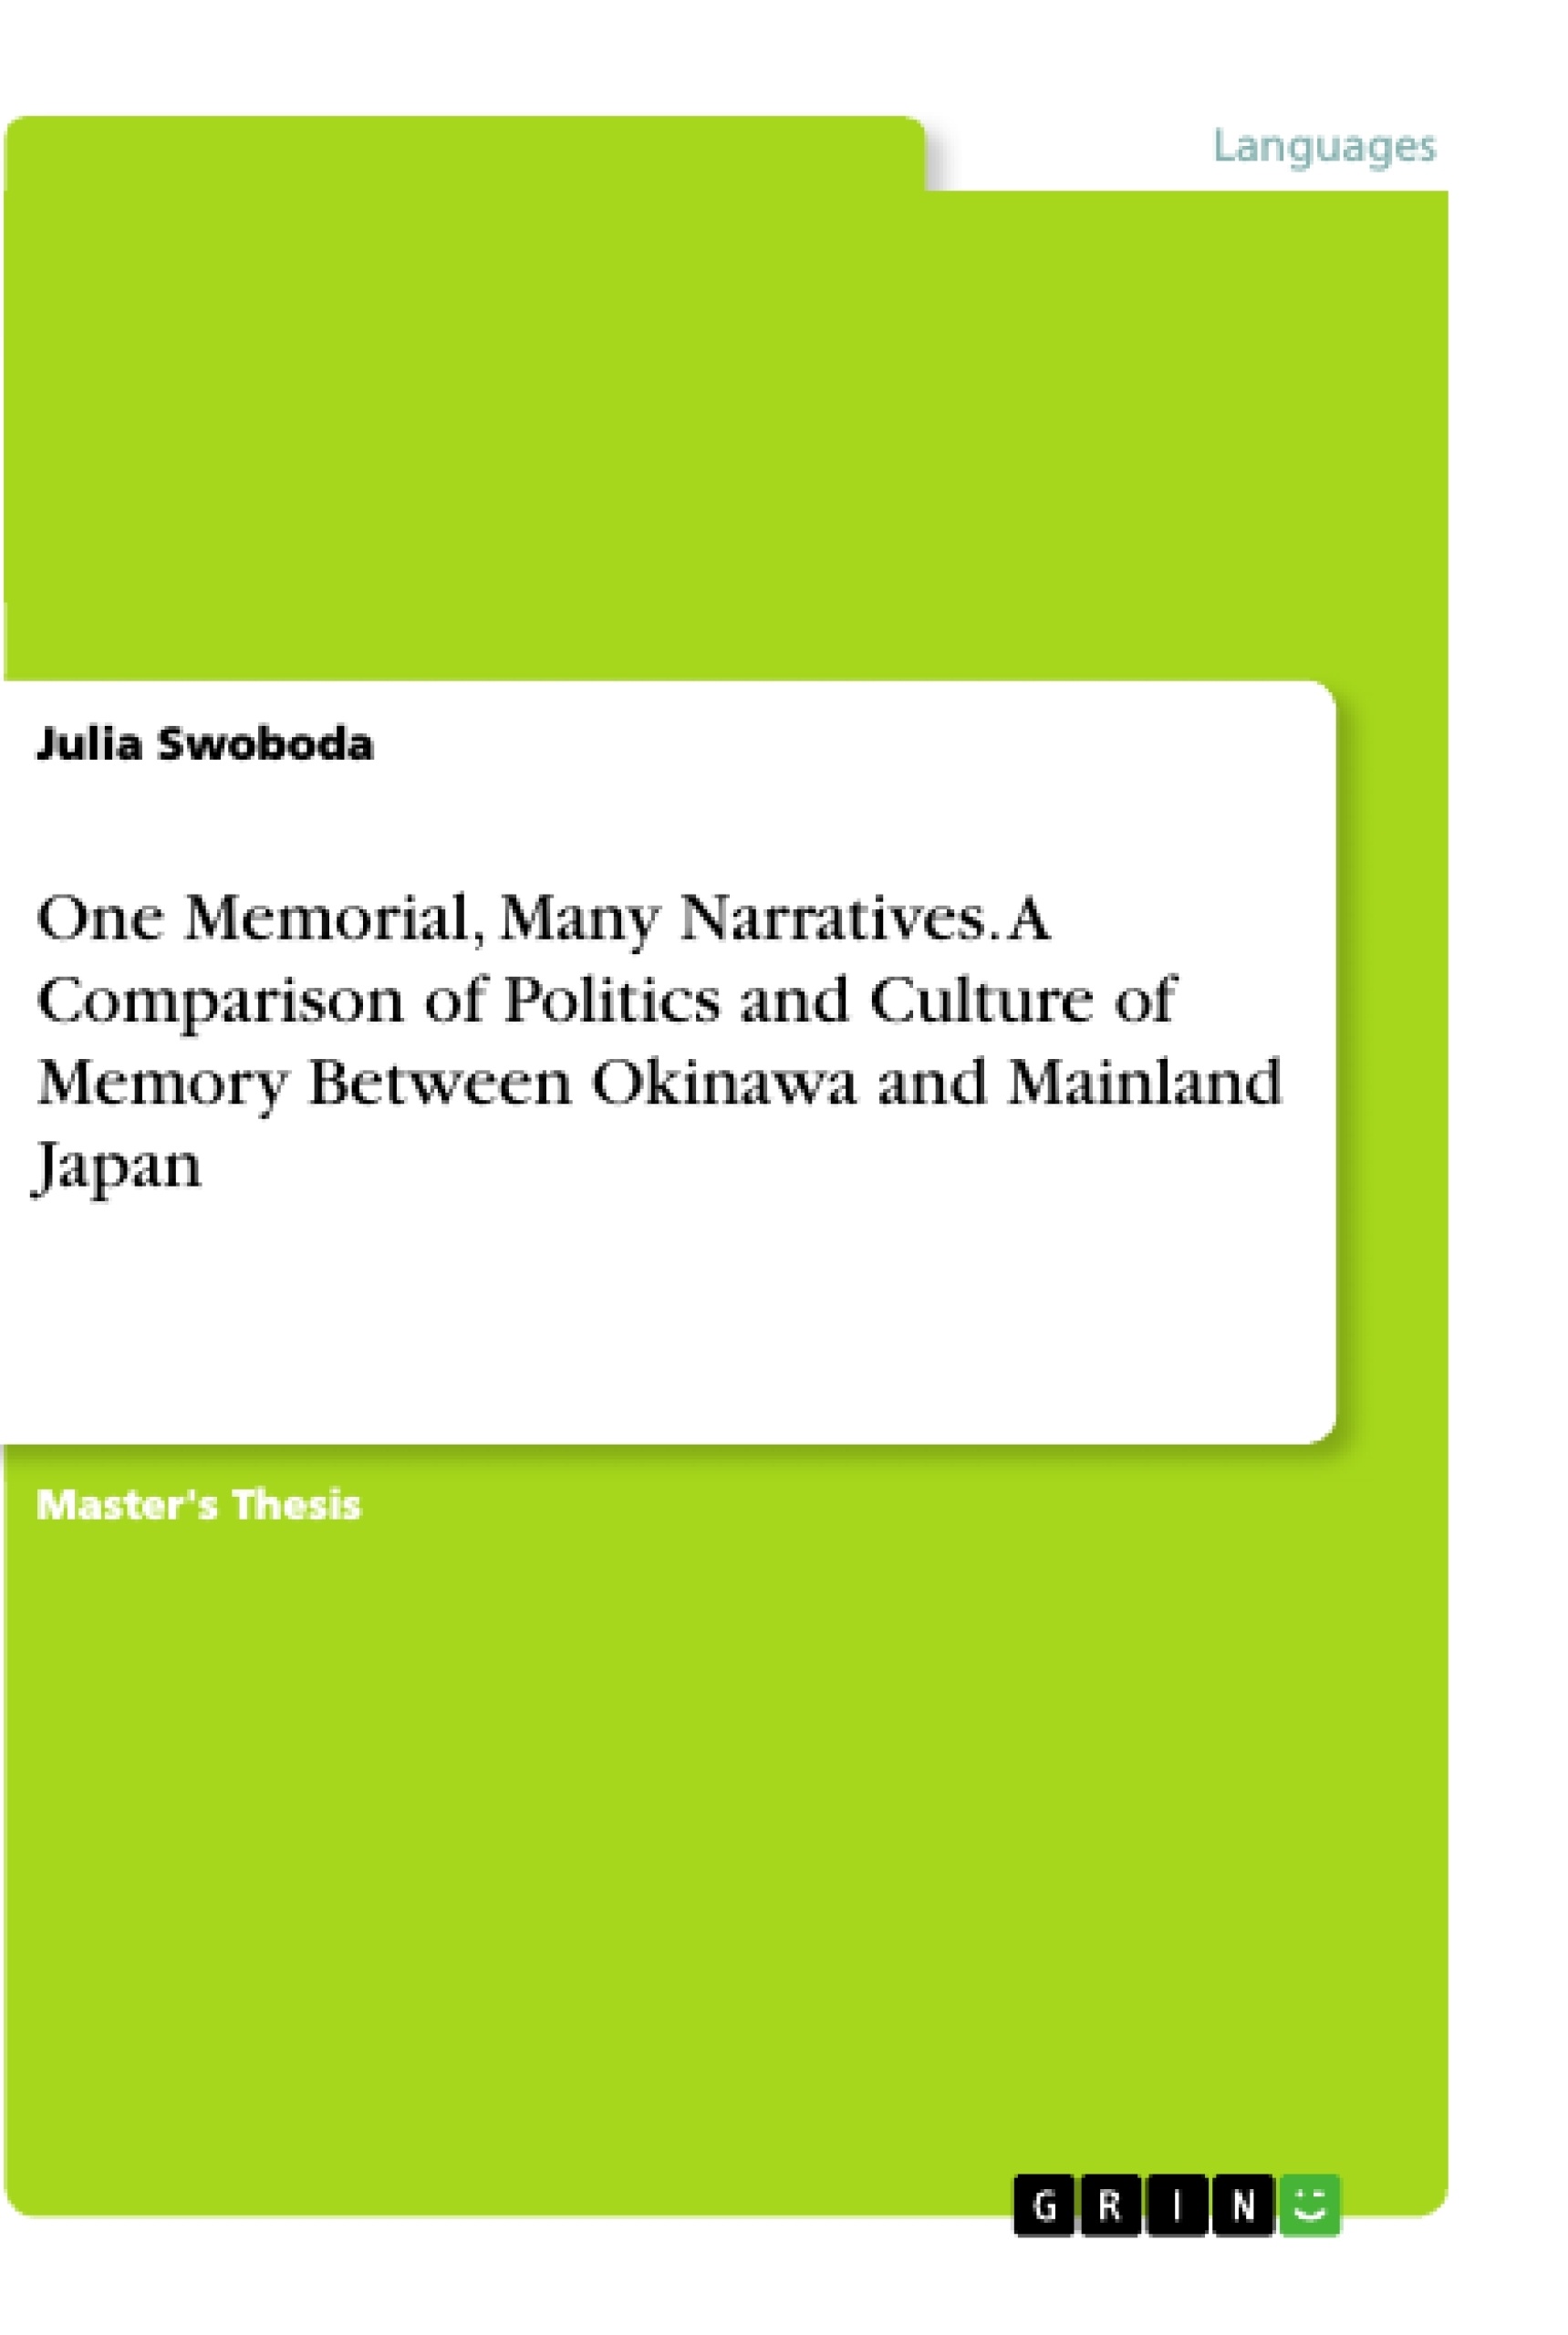 Titre: One Memorial, Many Narratives. A Comparison of Politics and Culture of Memory Between Okinawa and Mainland Japan